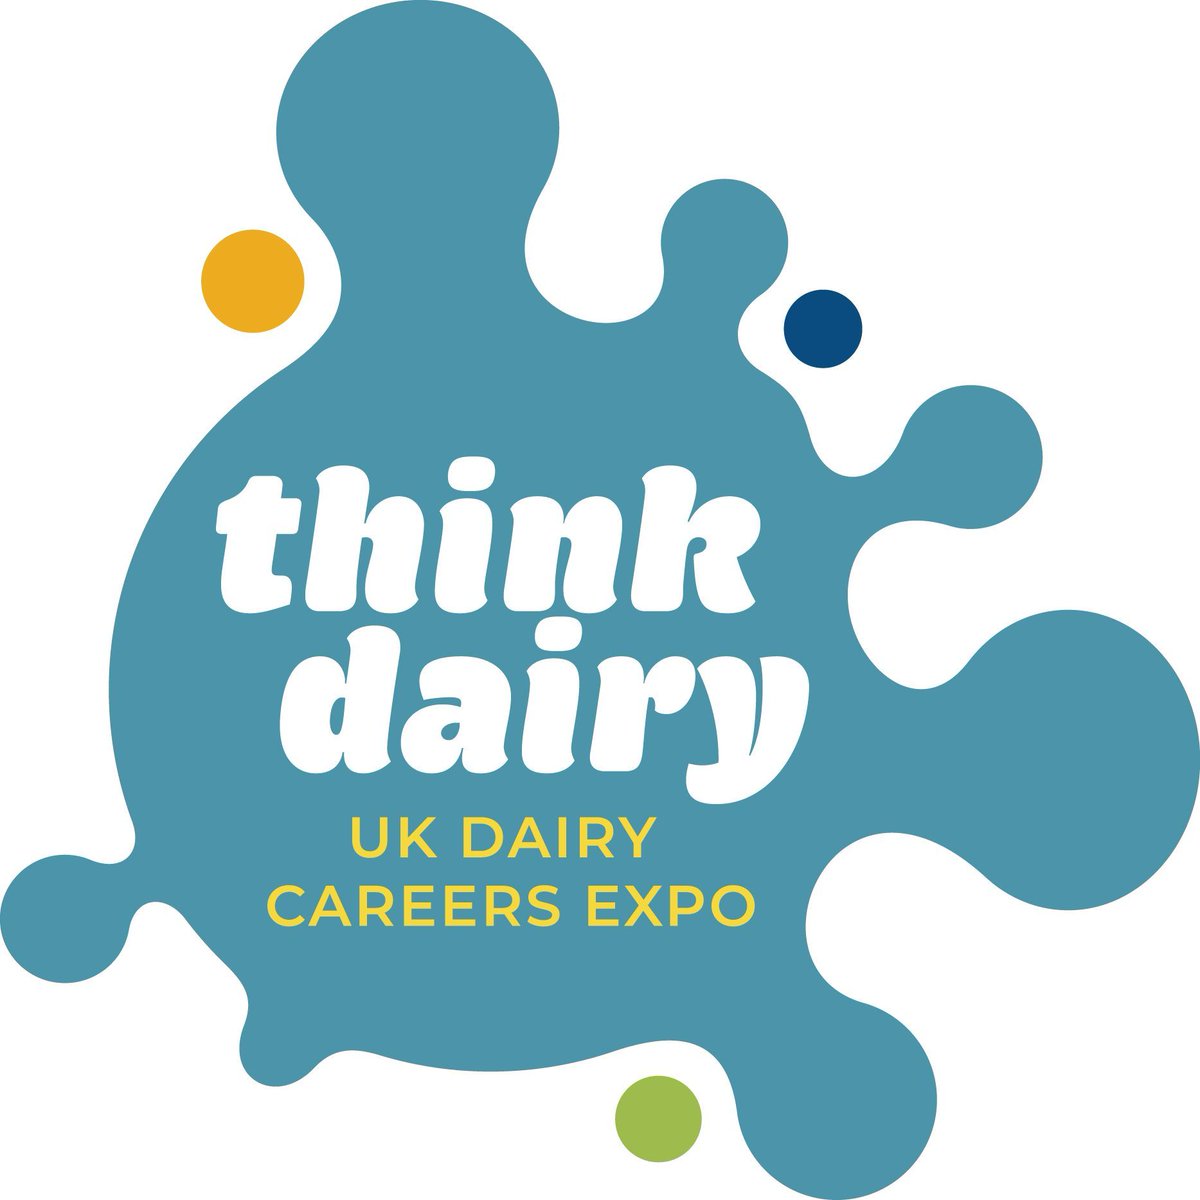 We now have OVER 15 secondary schools from across Dumfries & Galloway and Cumbria attending our Think Dairy Careers Expo on 23rd April! There are still places for businesses and recruiters! To book a stand please email info@digitialdairychain.co.uk